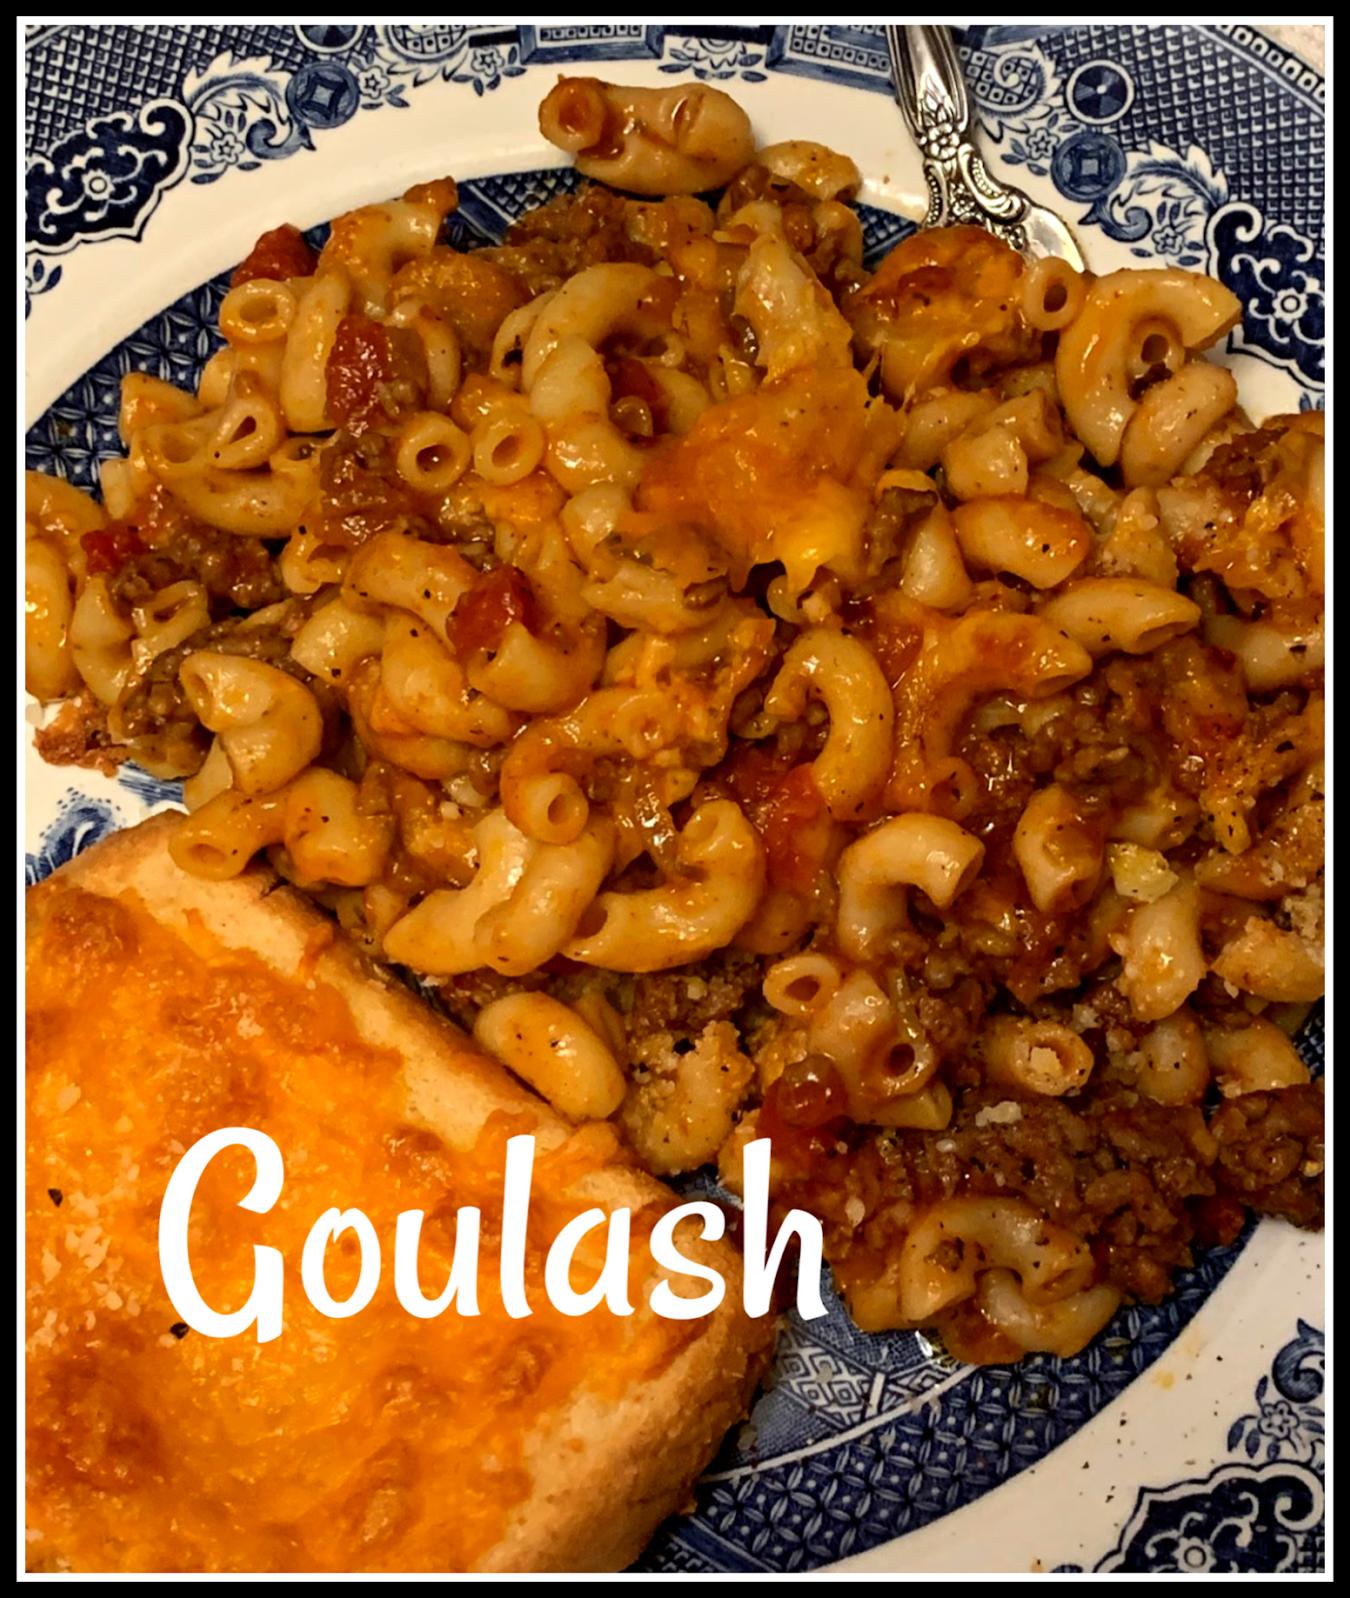  Hearty and flavorful, this goulash is a crowd-pleaser